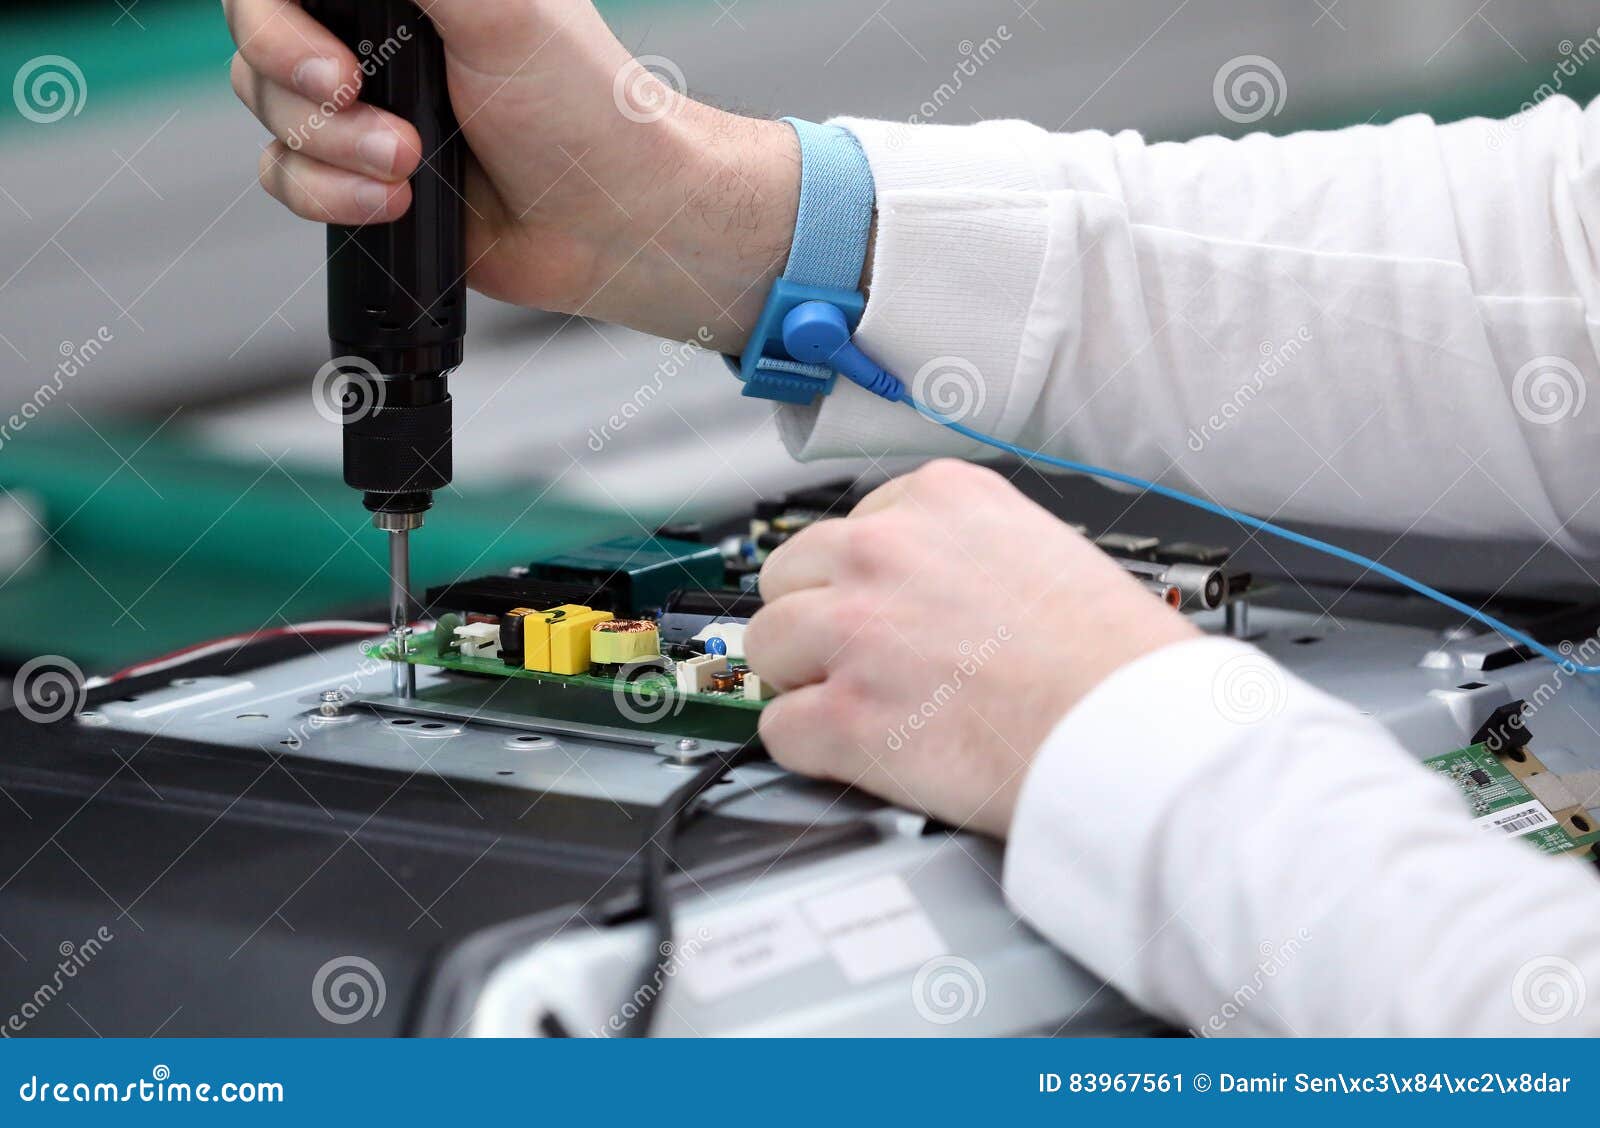 man working on assembly line